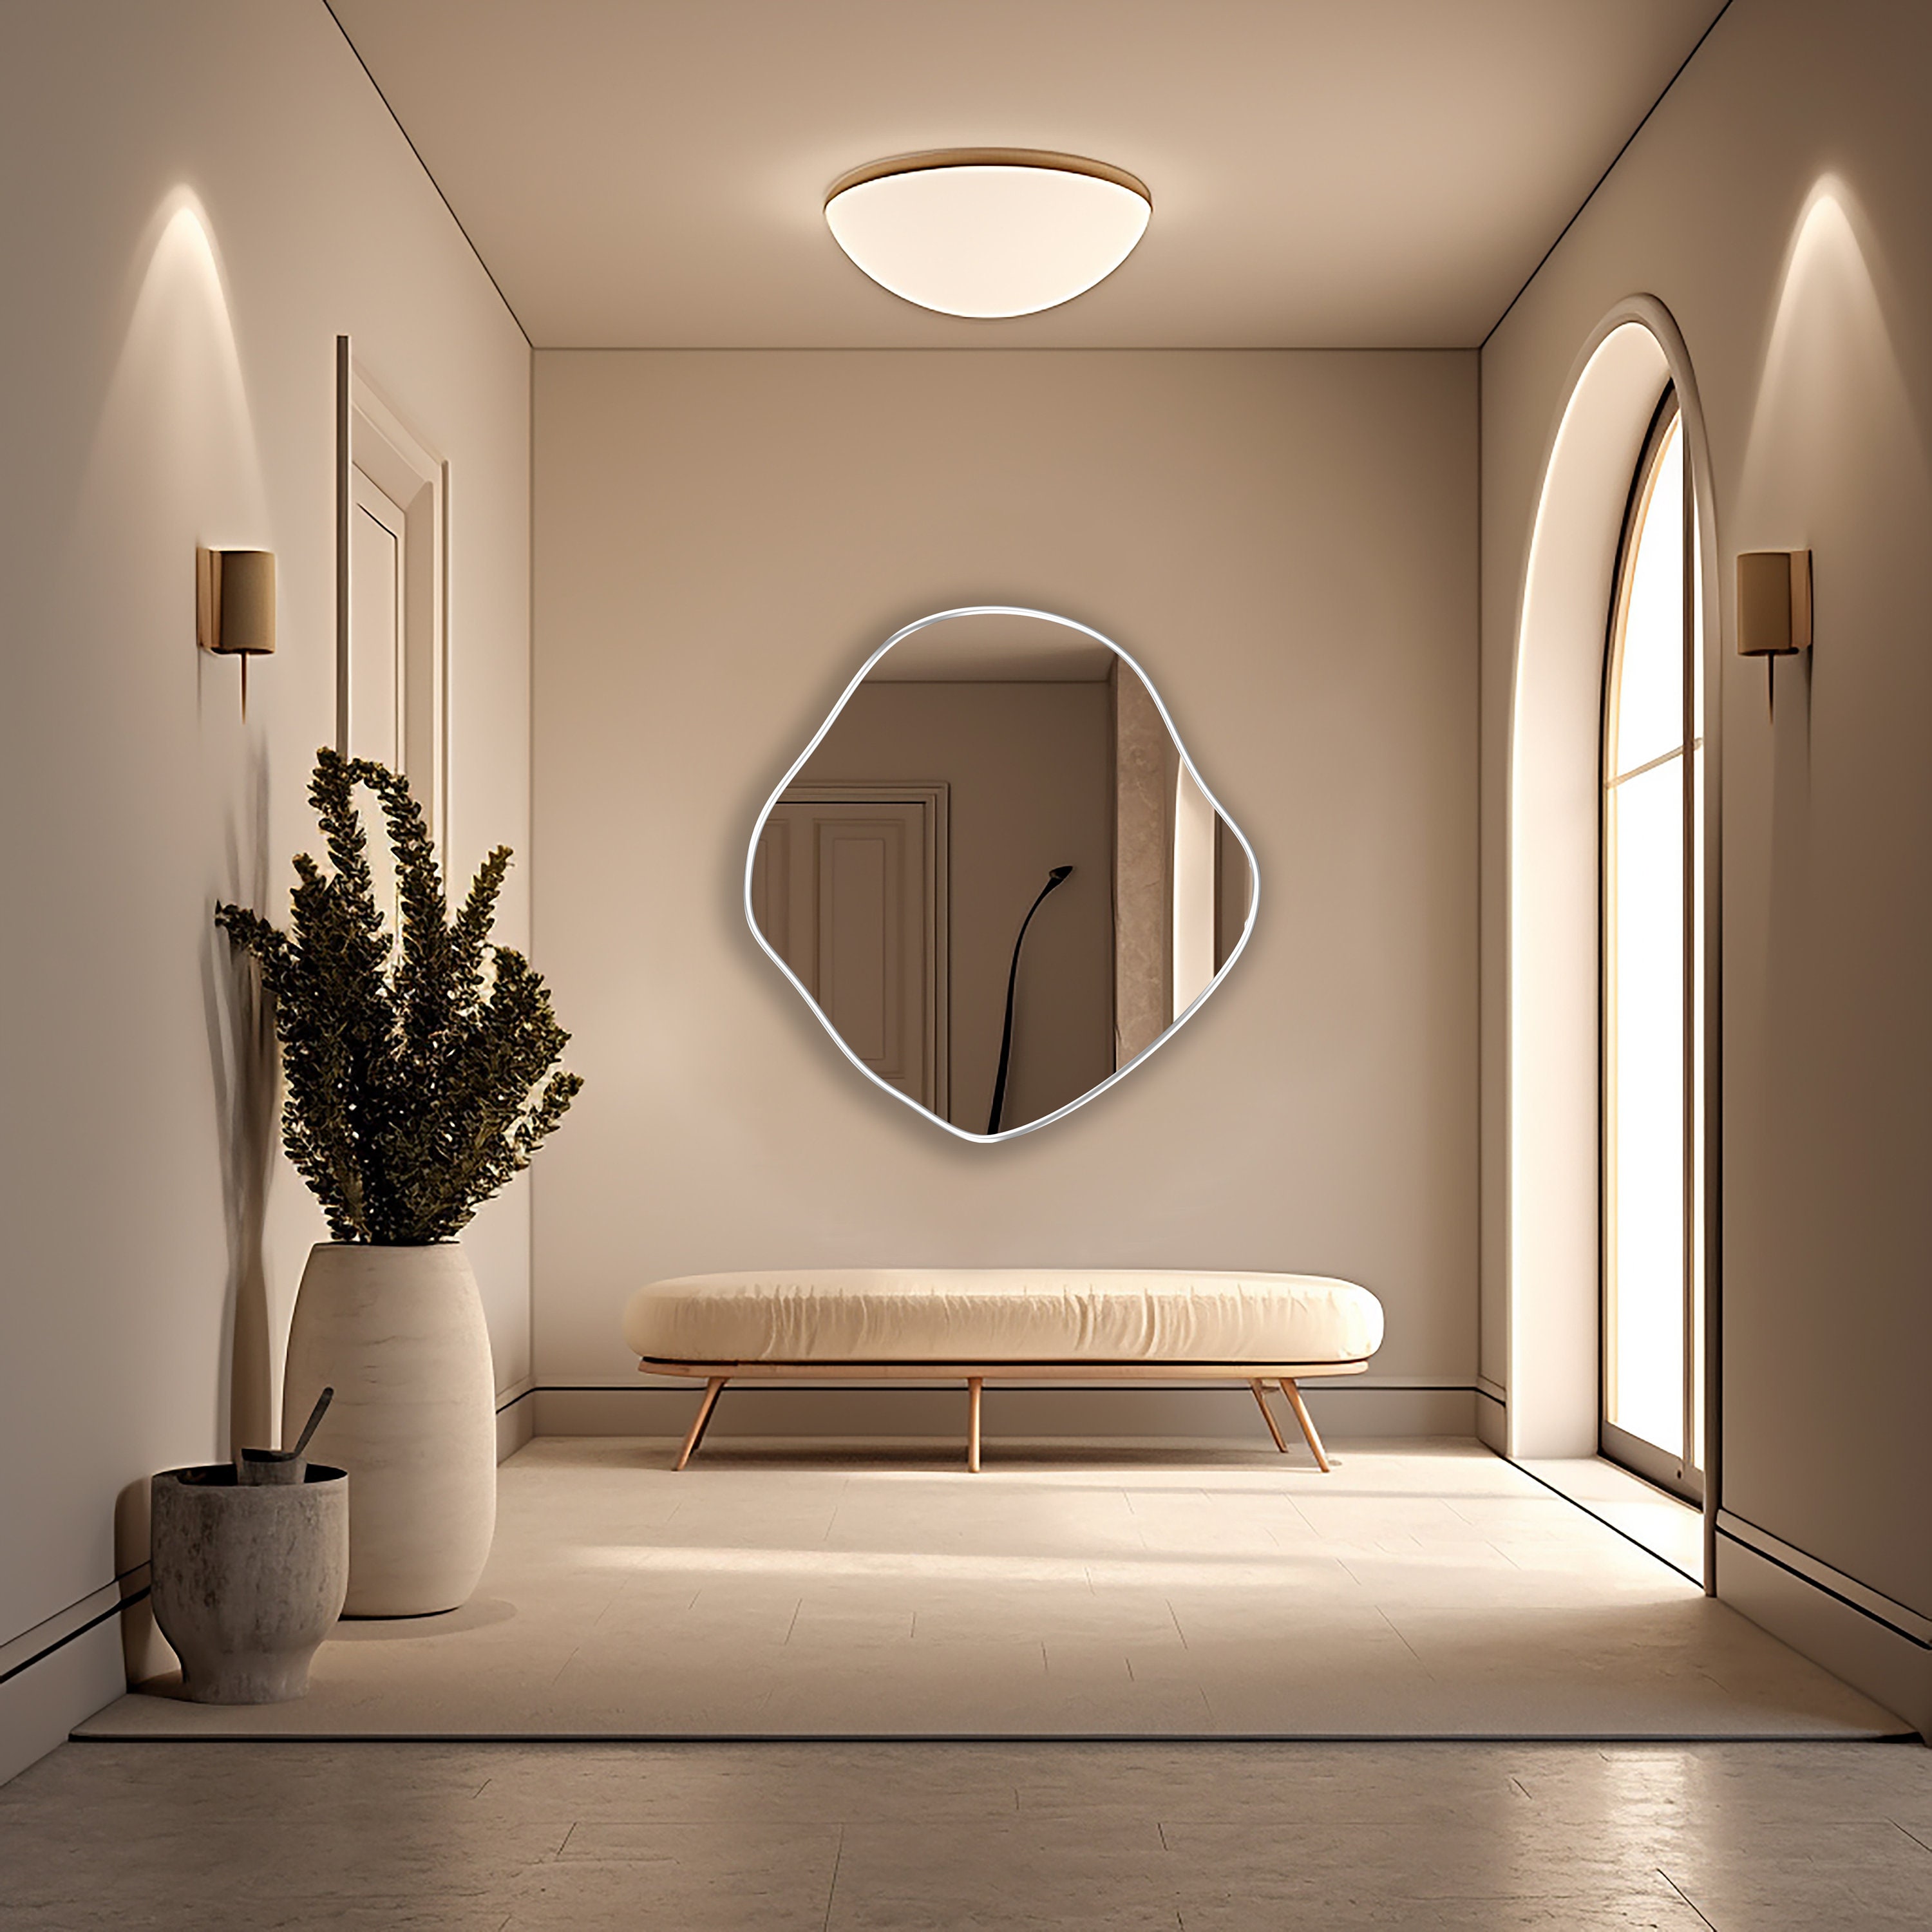 How To Decorate Your Room With An Irregular Shaped Mirror - FotoLog